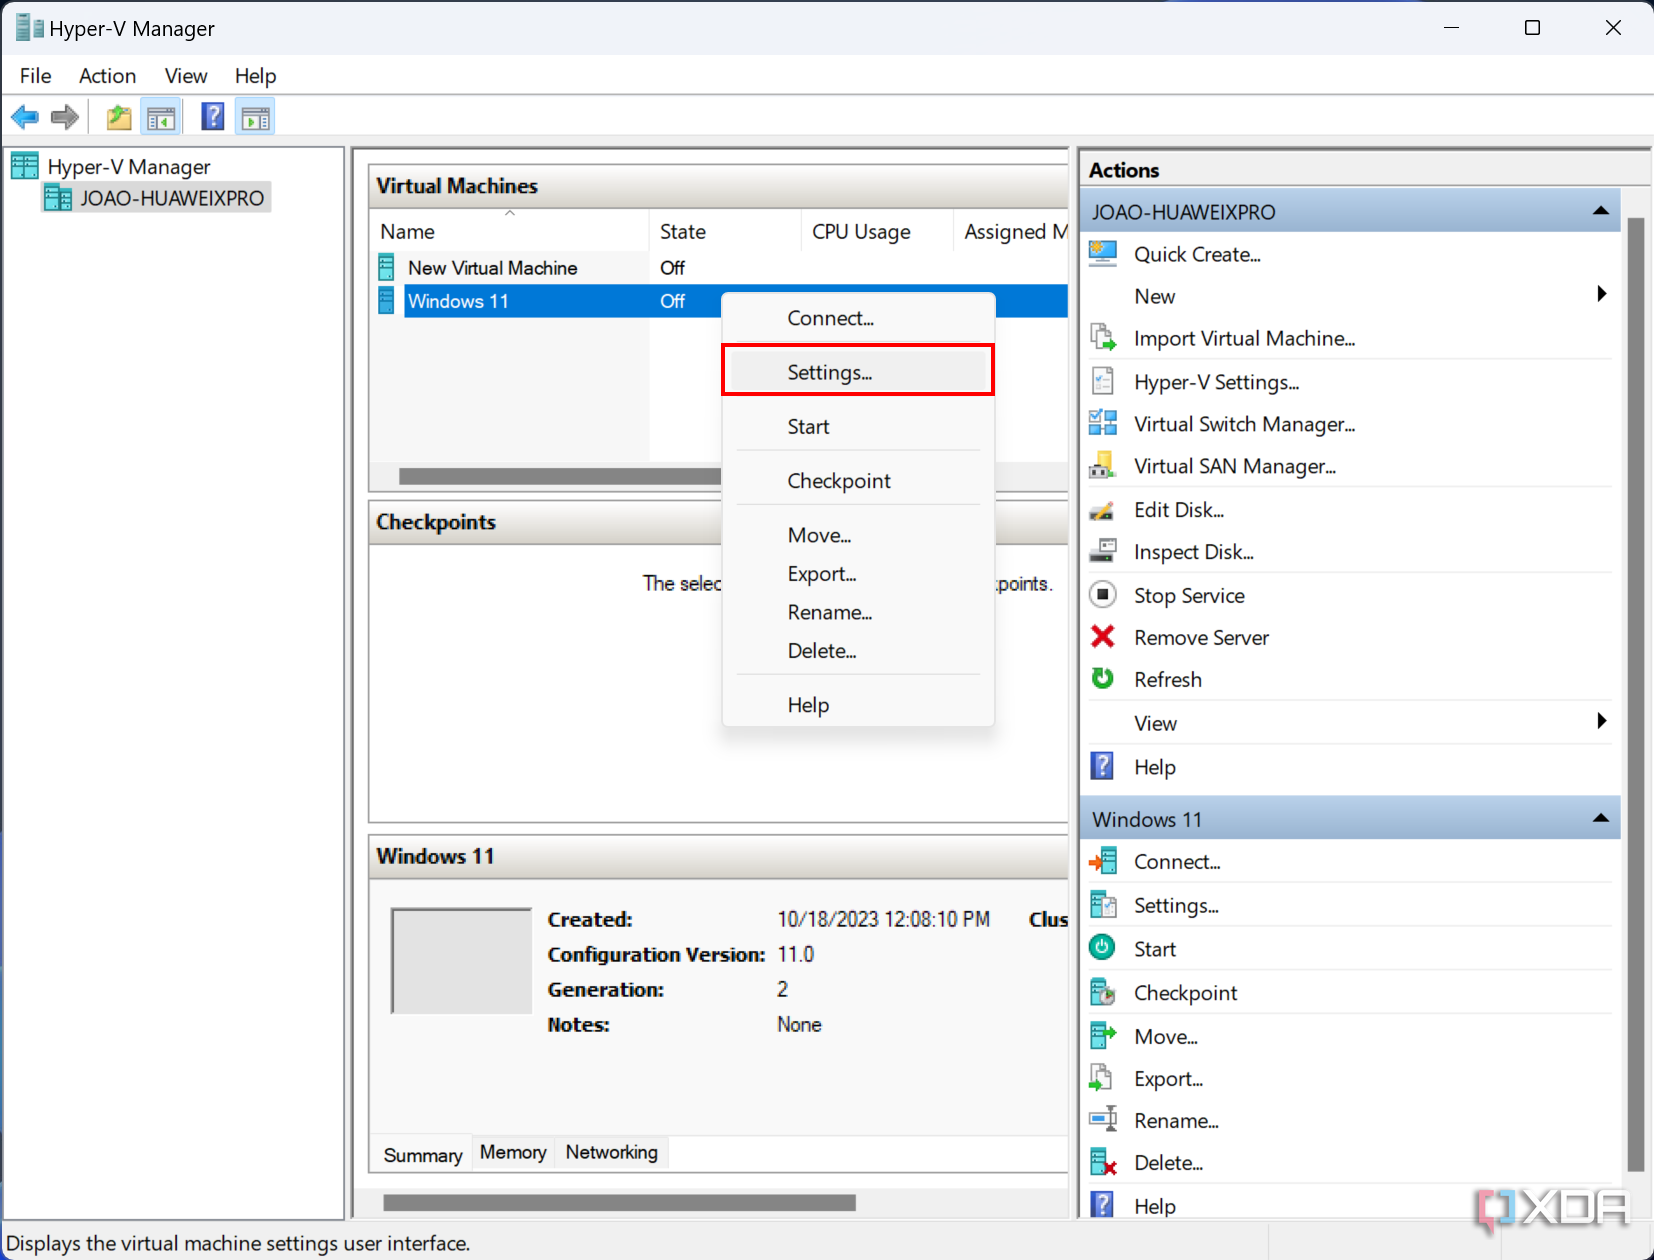 Screenshot of Hyper-V Manager with a context menu shown when right-clicking a virtual machine. The settings button is highlighted.